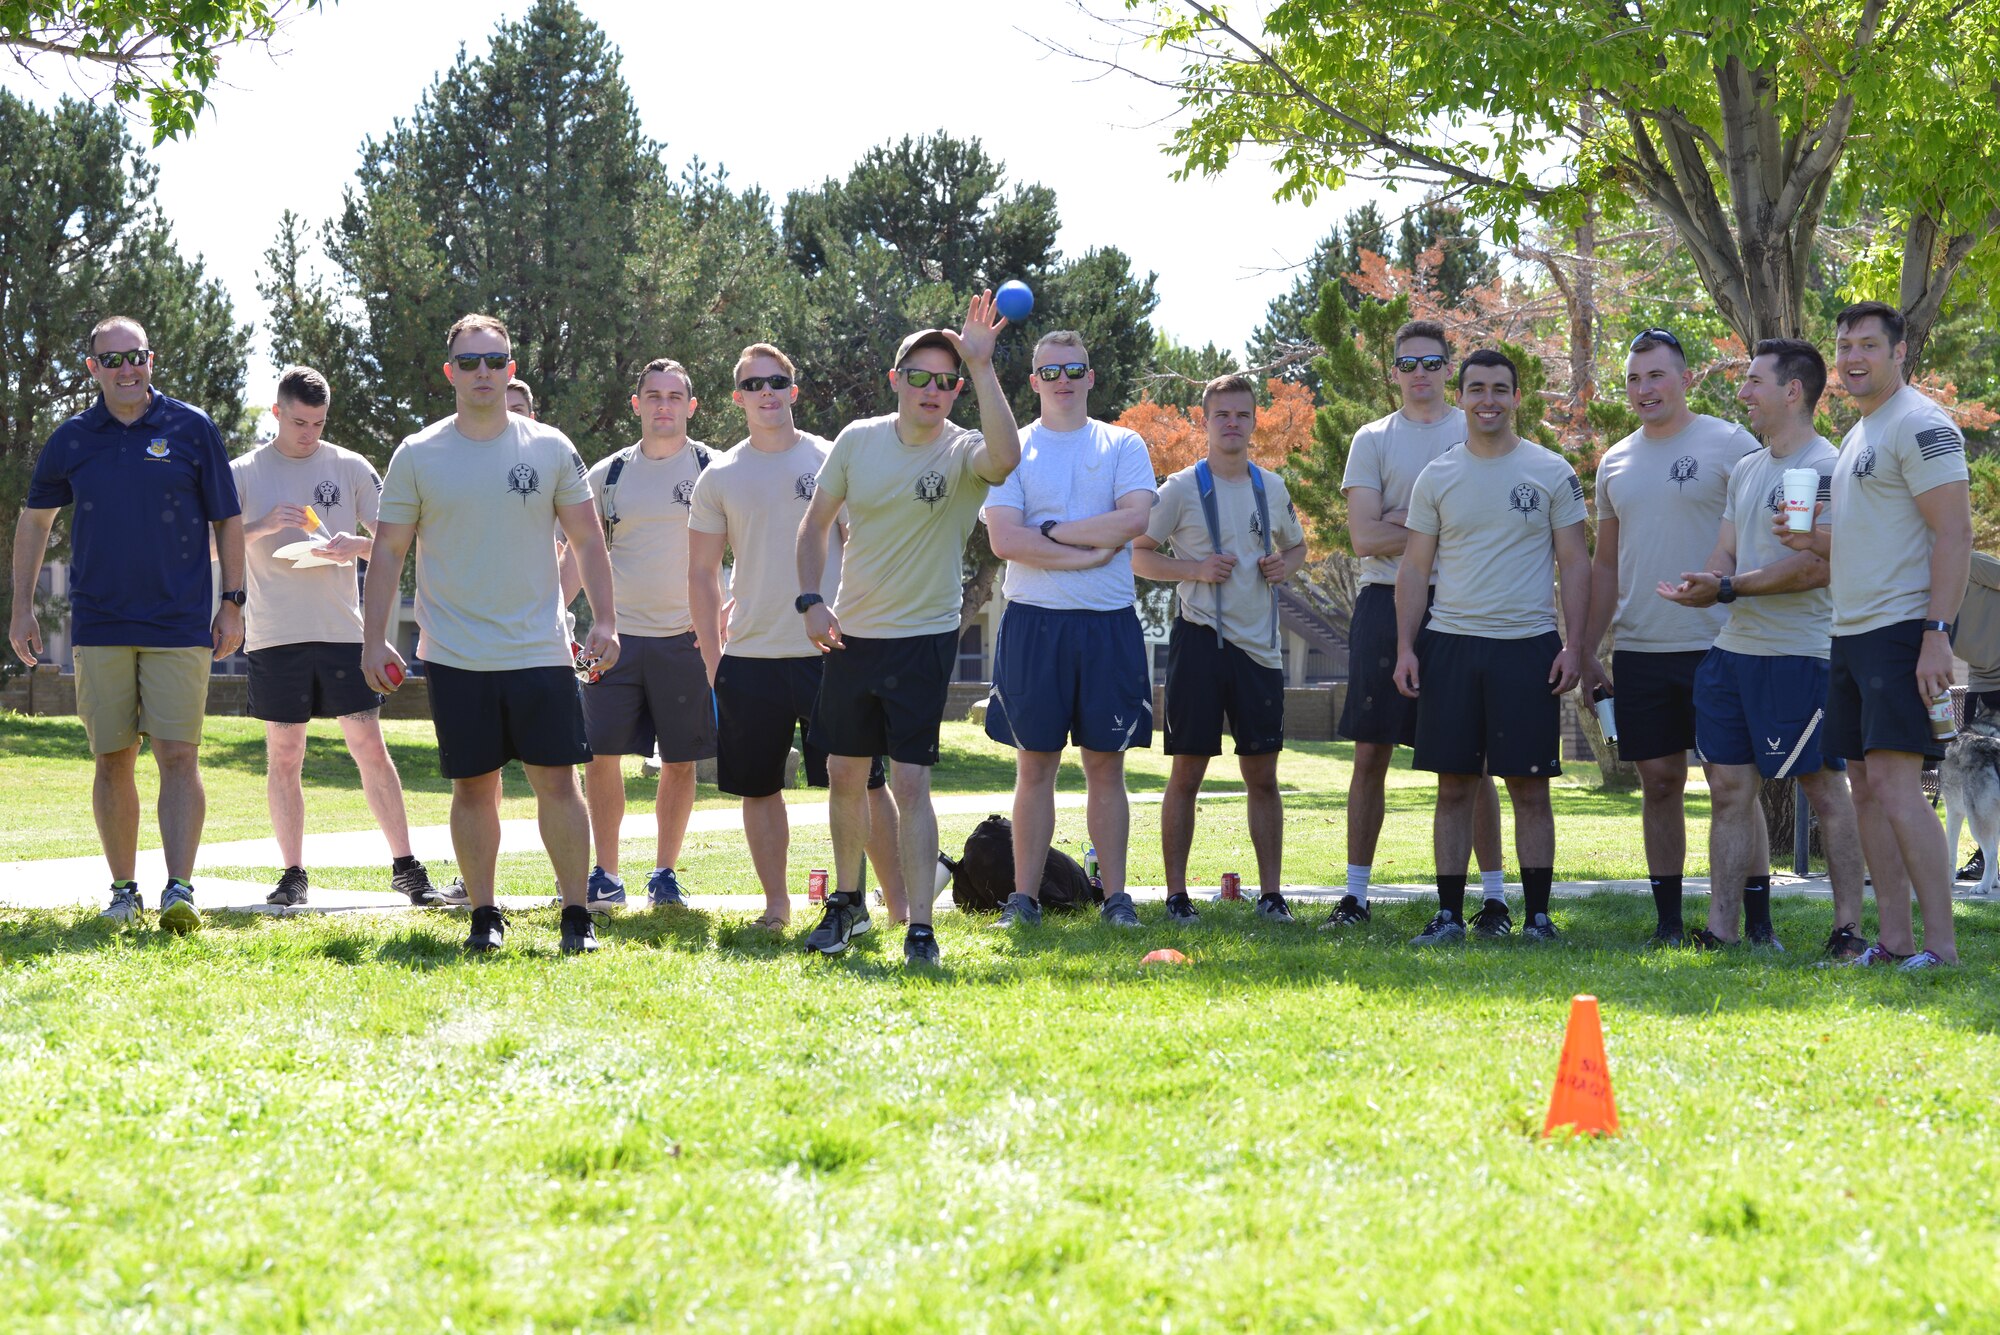 Members of the 71st Special Operations Squadron play bocce ball against 58th Special Operations Wing leadership during the 2019 58 SOW Sports Day at Kirtland Air Force Base, N.M., Sept. 27, 2019. Other sports played throughout the day included basketball, kickball, volleyball and more. The sports day included a competition between all the squadrons in the wing with top placements in every sport earning points for the unit. The 58th Aircraft Maintenance Squadron won the competition with almost double the points of the second place squadron.